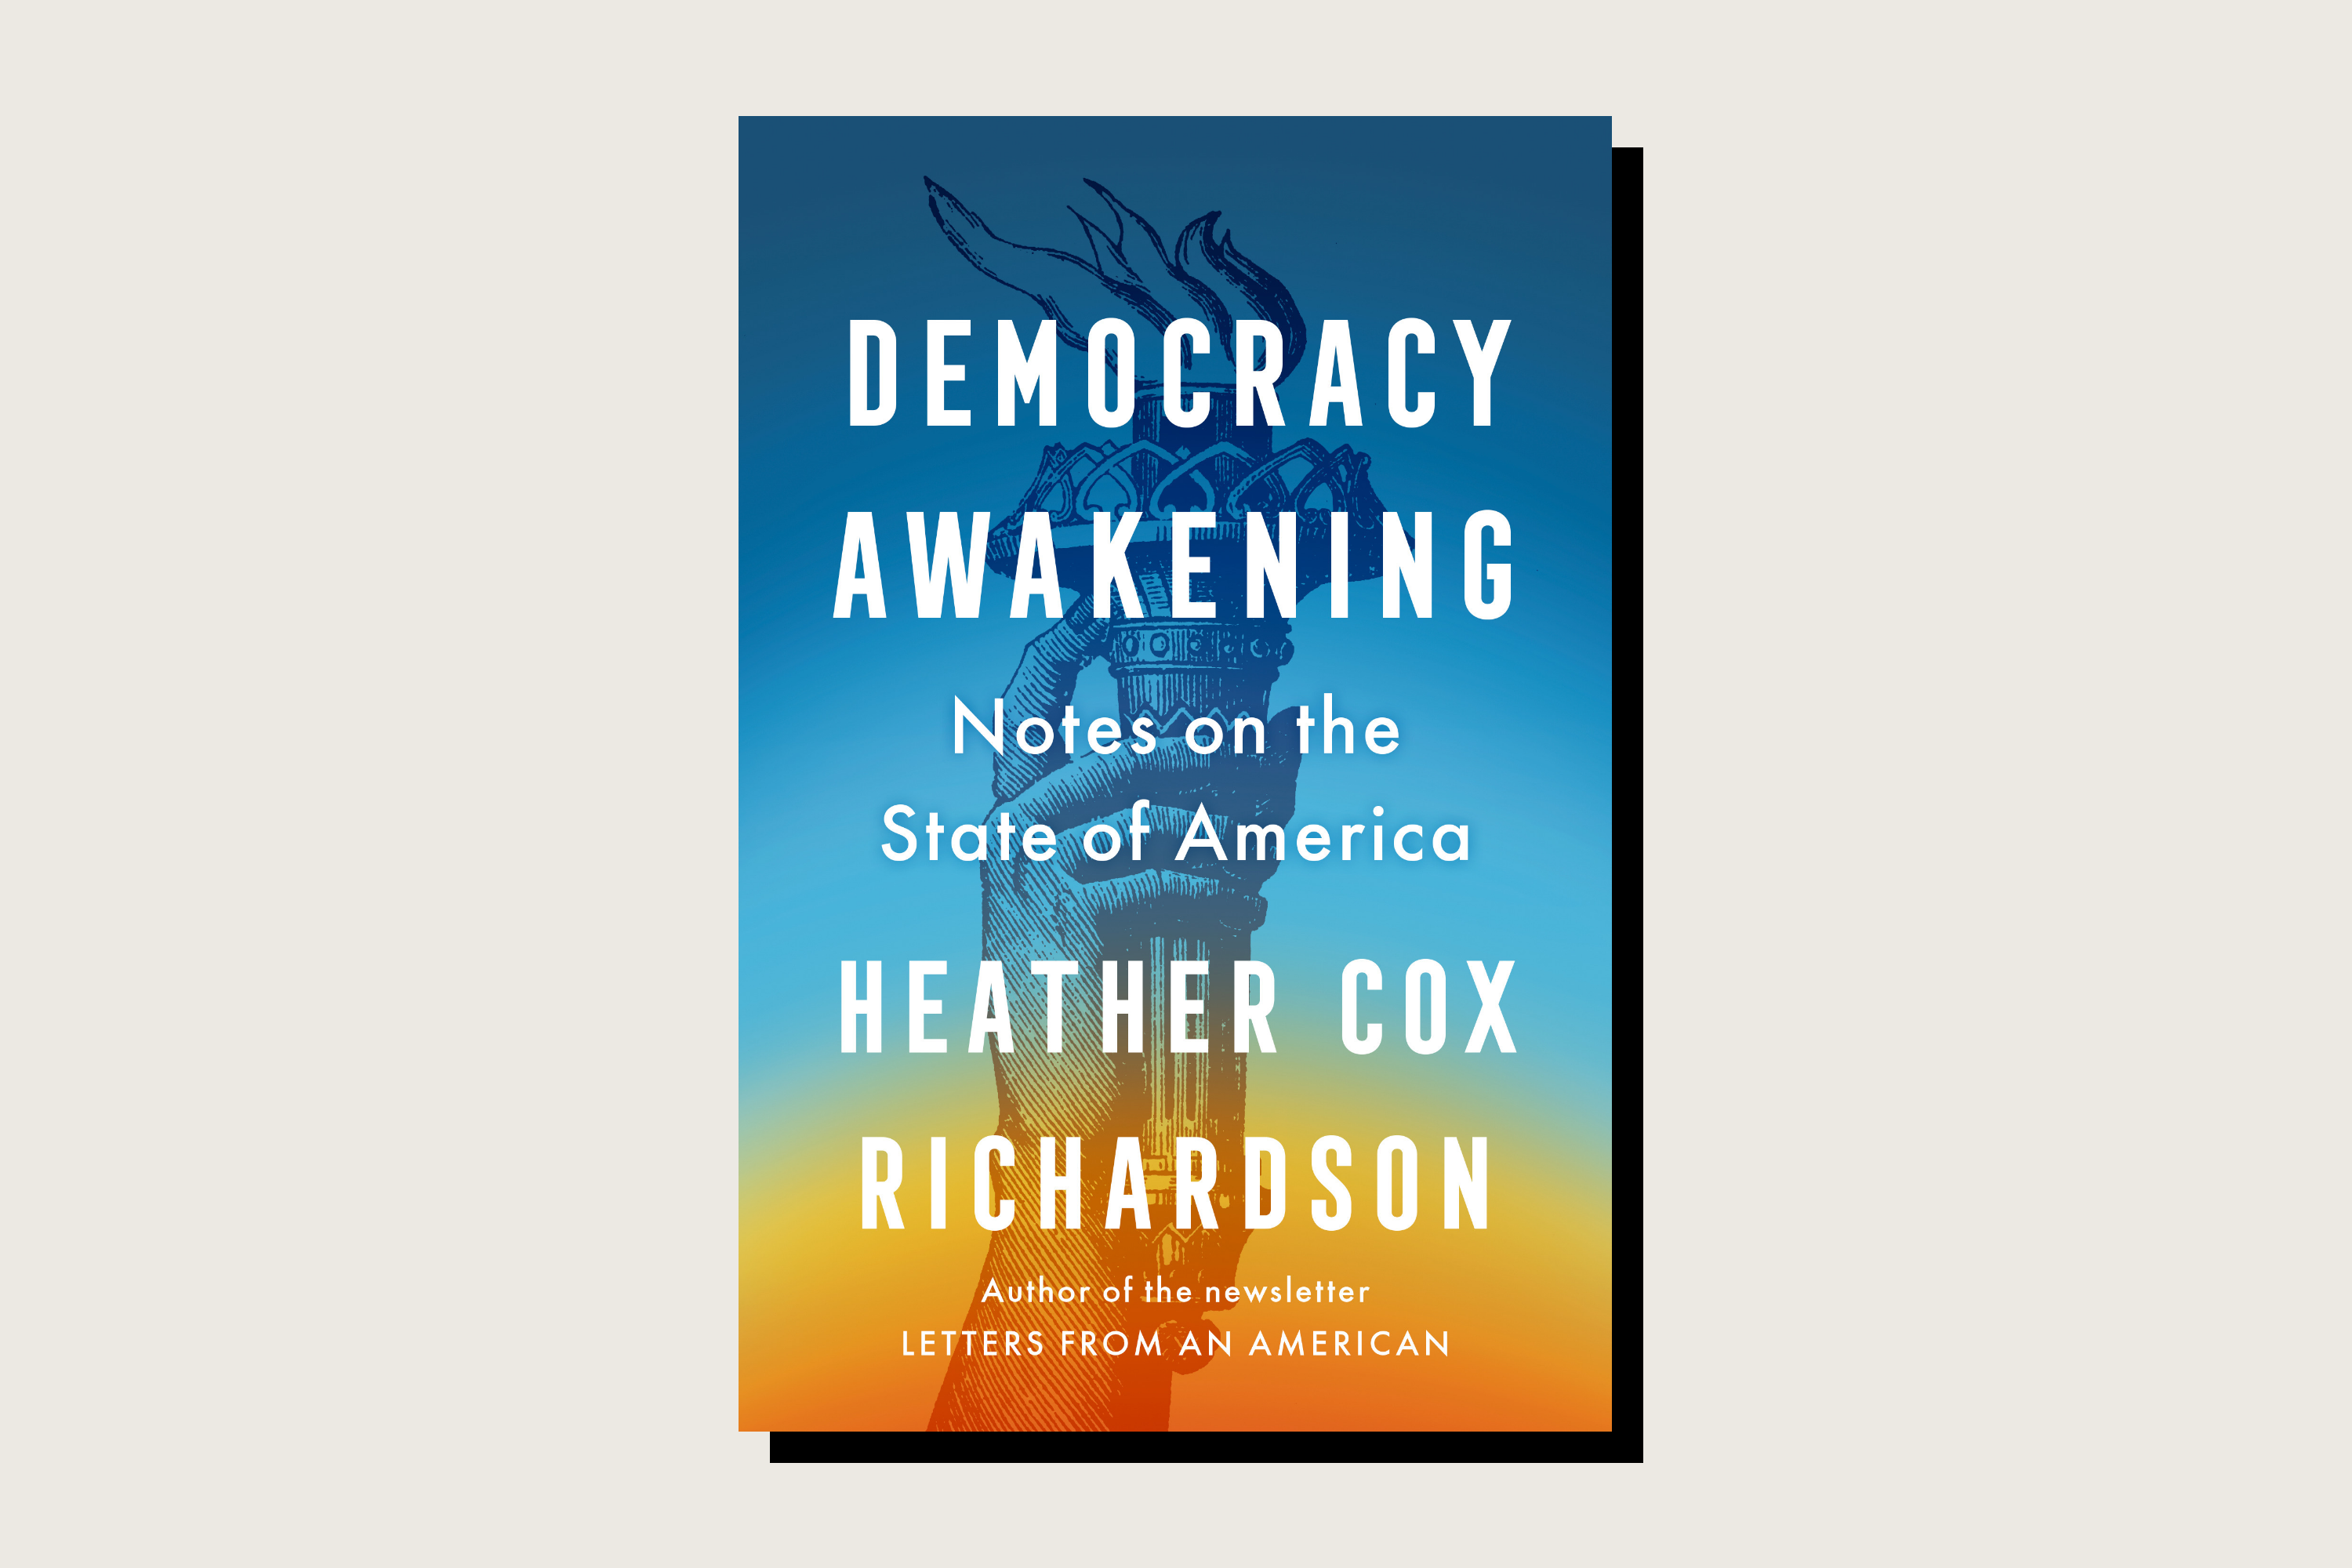 The book cover for Democracy Awakening: Notes on the State of America by Heather Cox Richardson.